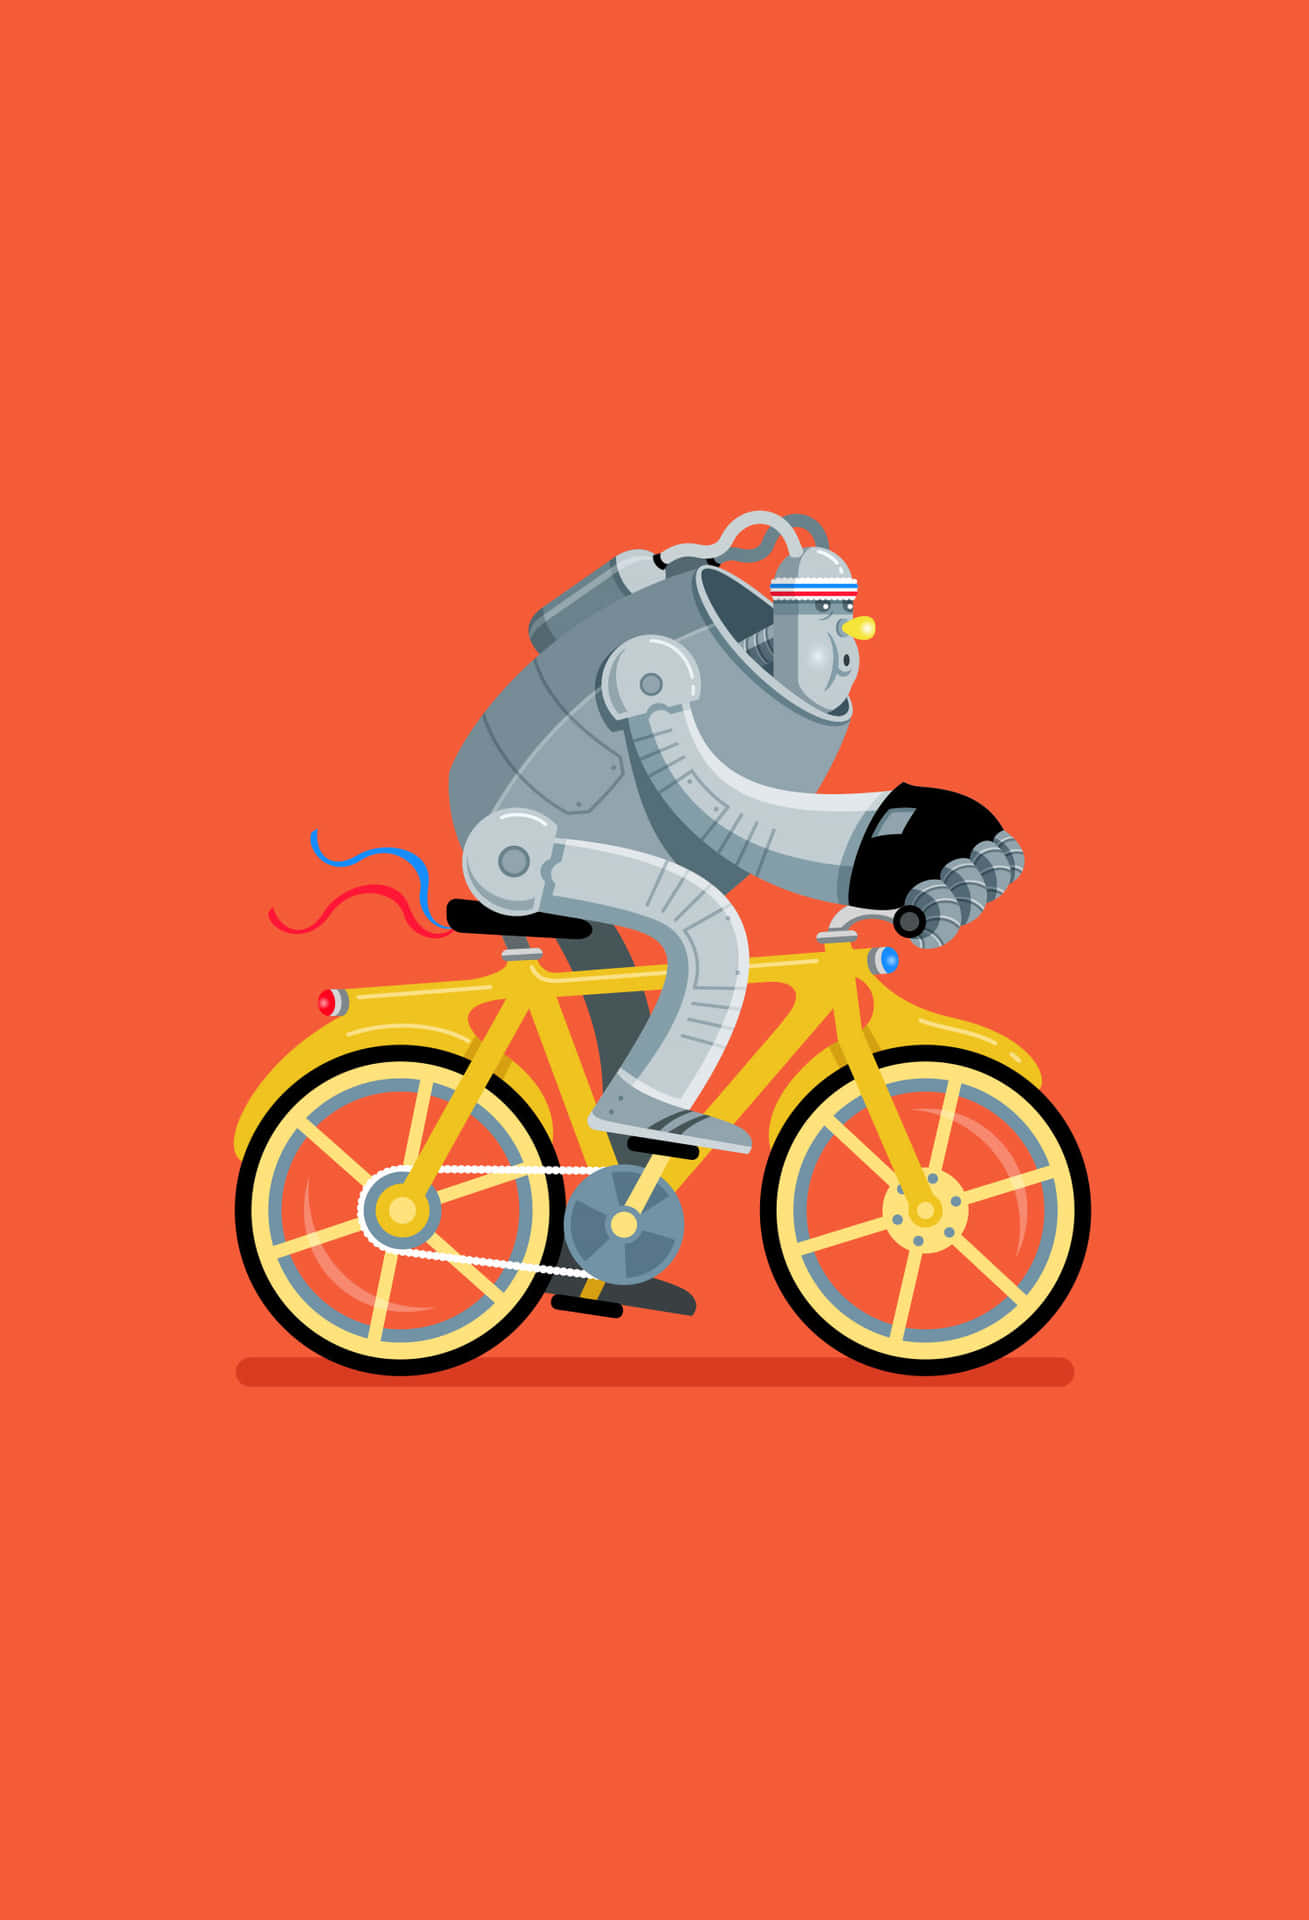 A Robot Riding A Bicycle On An Orange Background Wallpaper